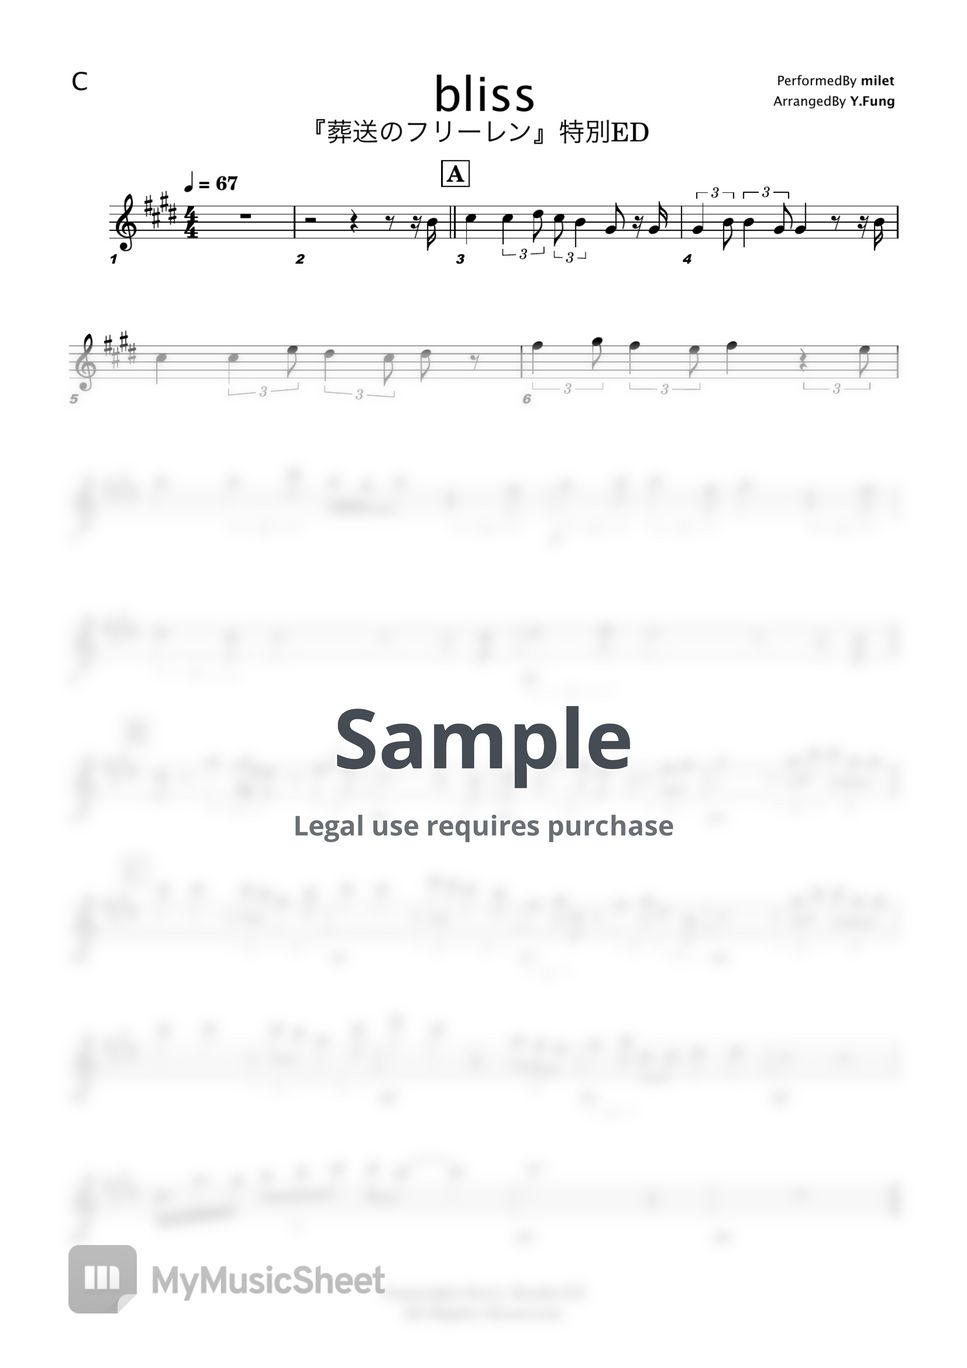 Milet - Bliss (C/ Bb/ F/ Eb Solo Sheet Music) by FungYip